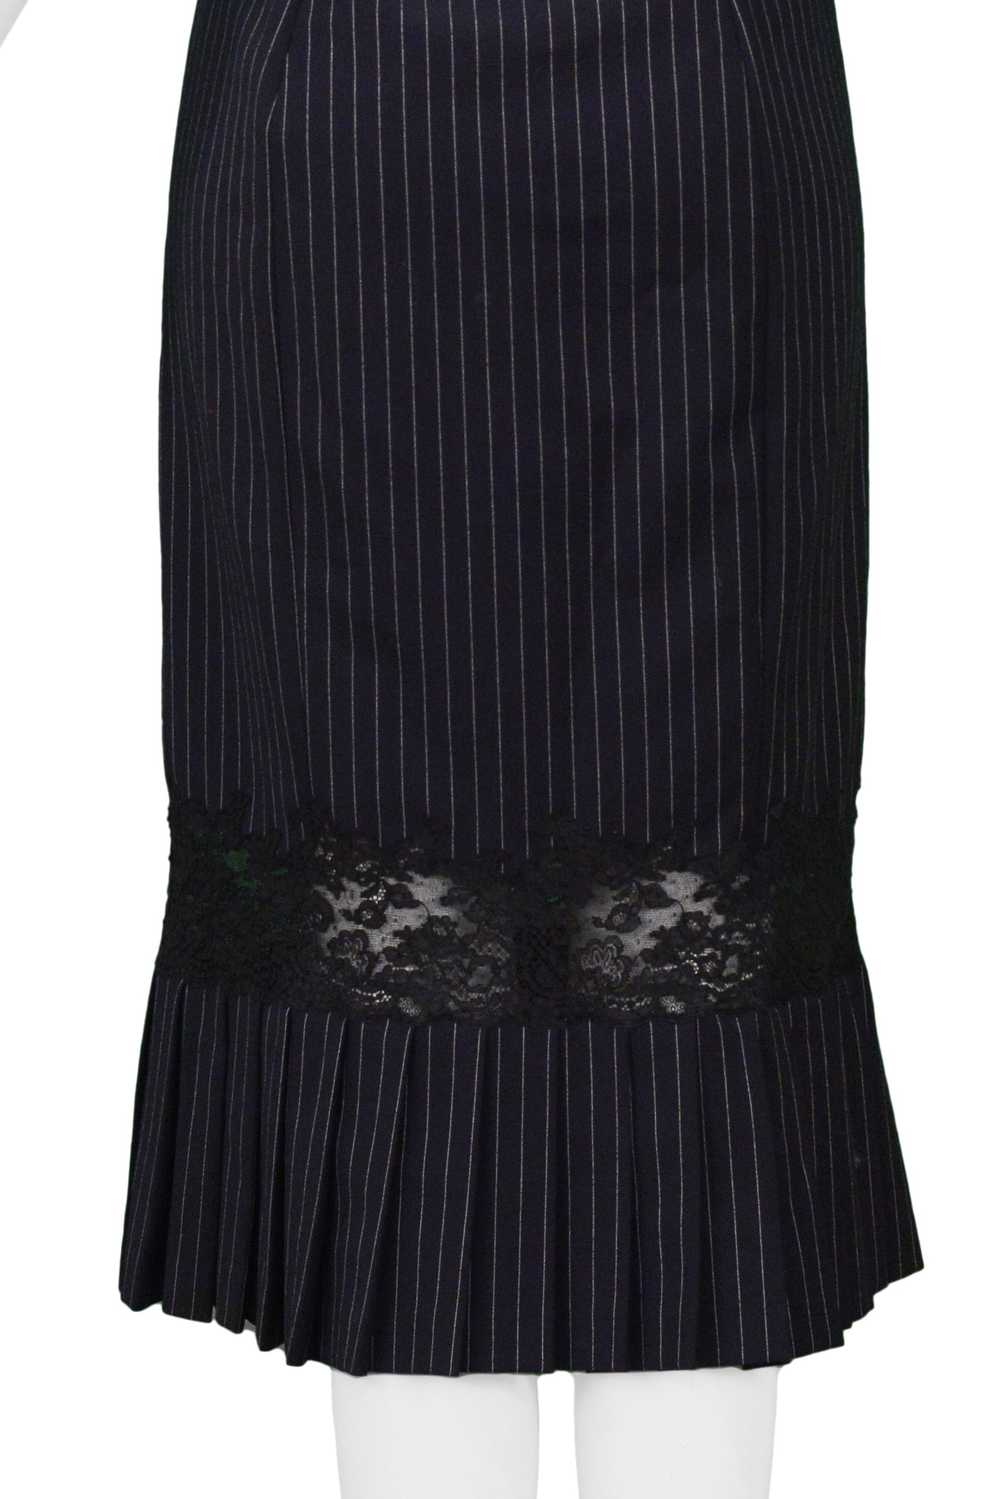 JOHN GALLIANO NAVY PINSTRIPE DRESS WITH LACE INSET - image 4